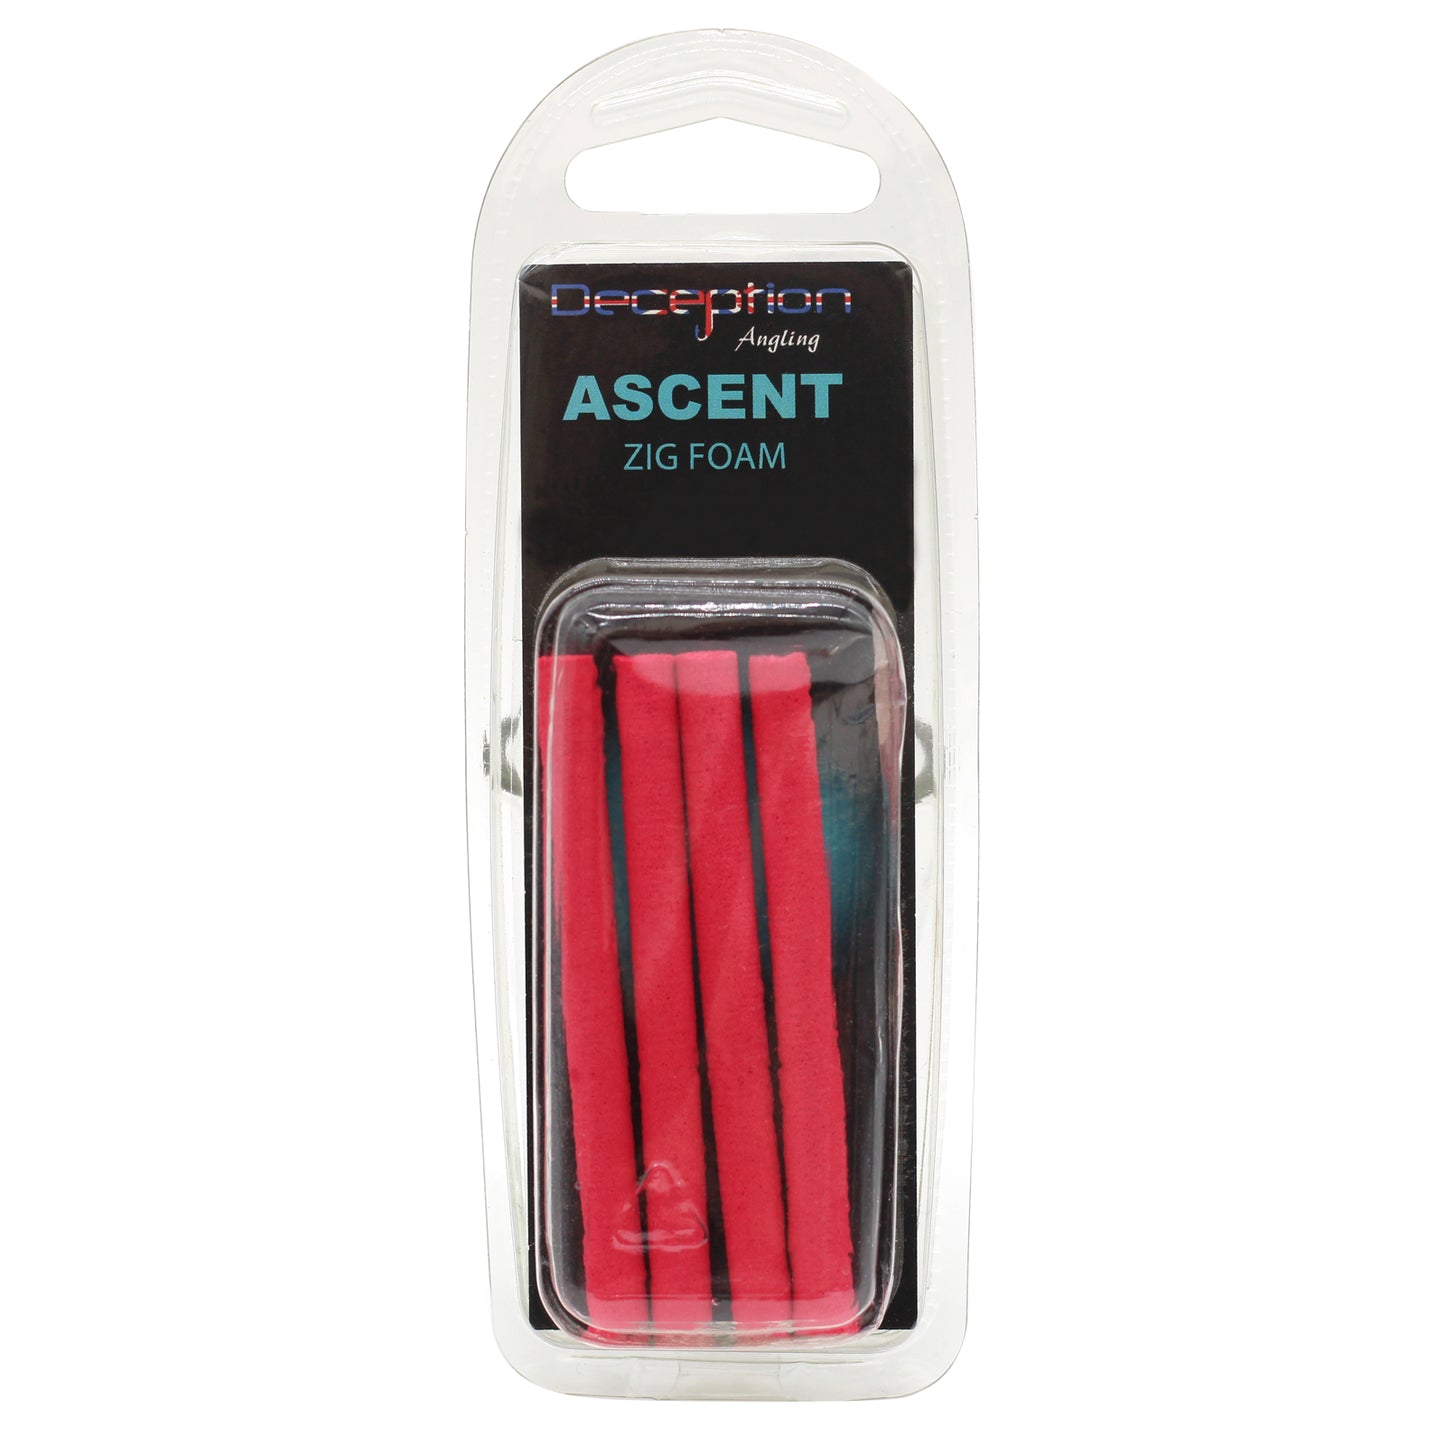 Deception Angling Ascent Zig Foam for Fishing Pack of 4